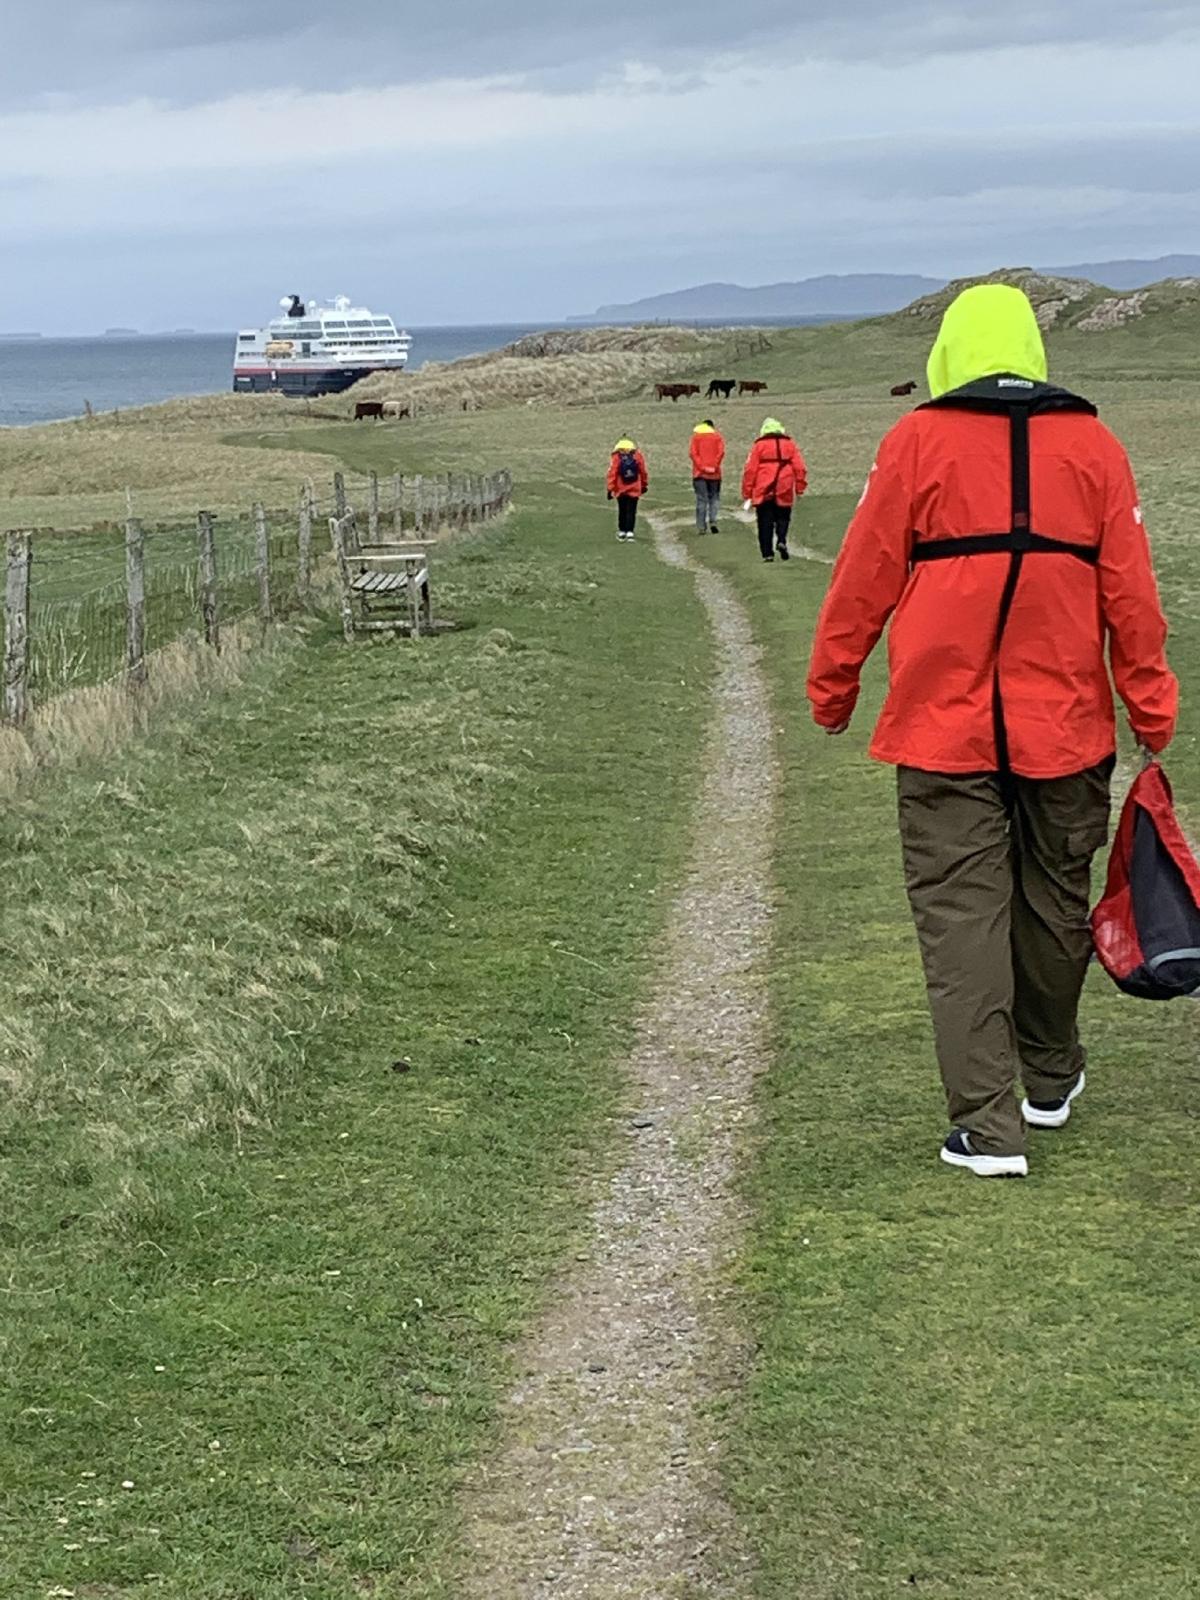 Stranded Hurtigruten passengers walk across a cow pasture on the Scottish island of Iona to get to their ship. (Courtesy of Sharon Whitley Larsen)